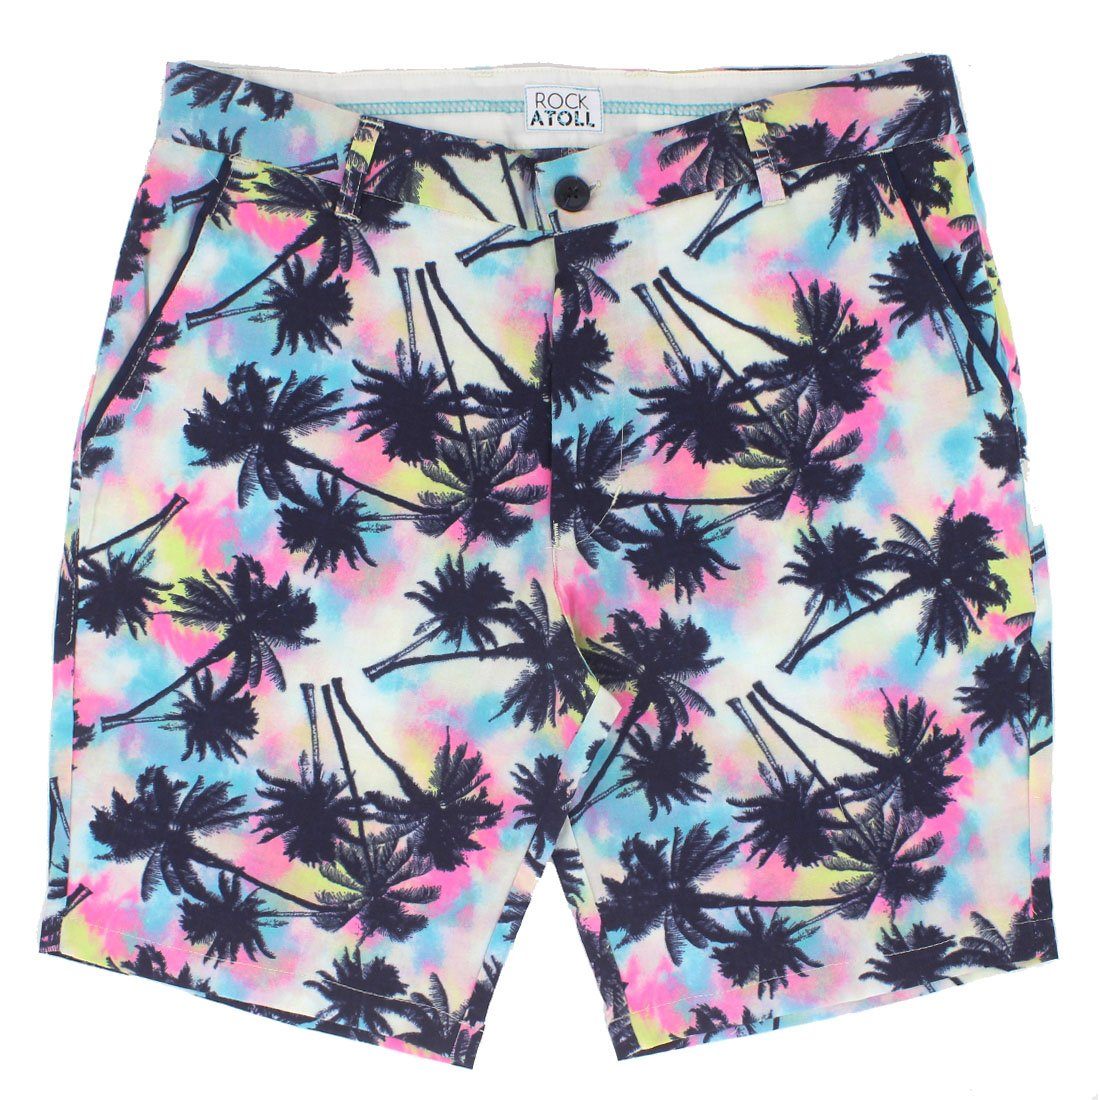 Rock Atoll Bold Colorful Print Men's Shorts Preppy Fit